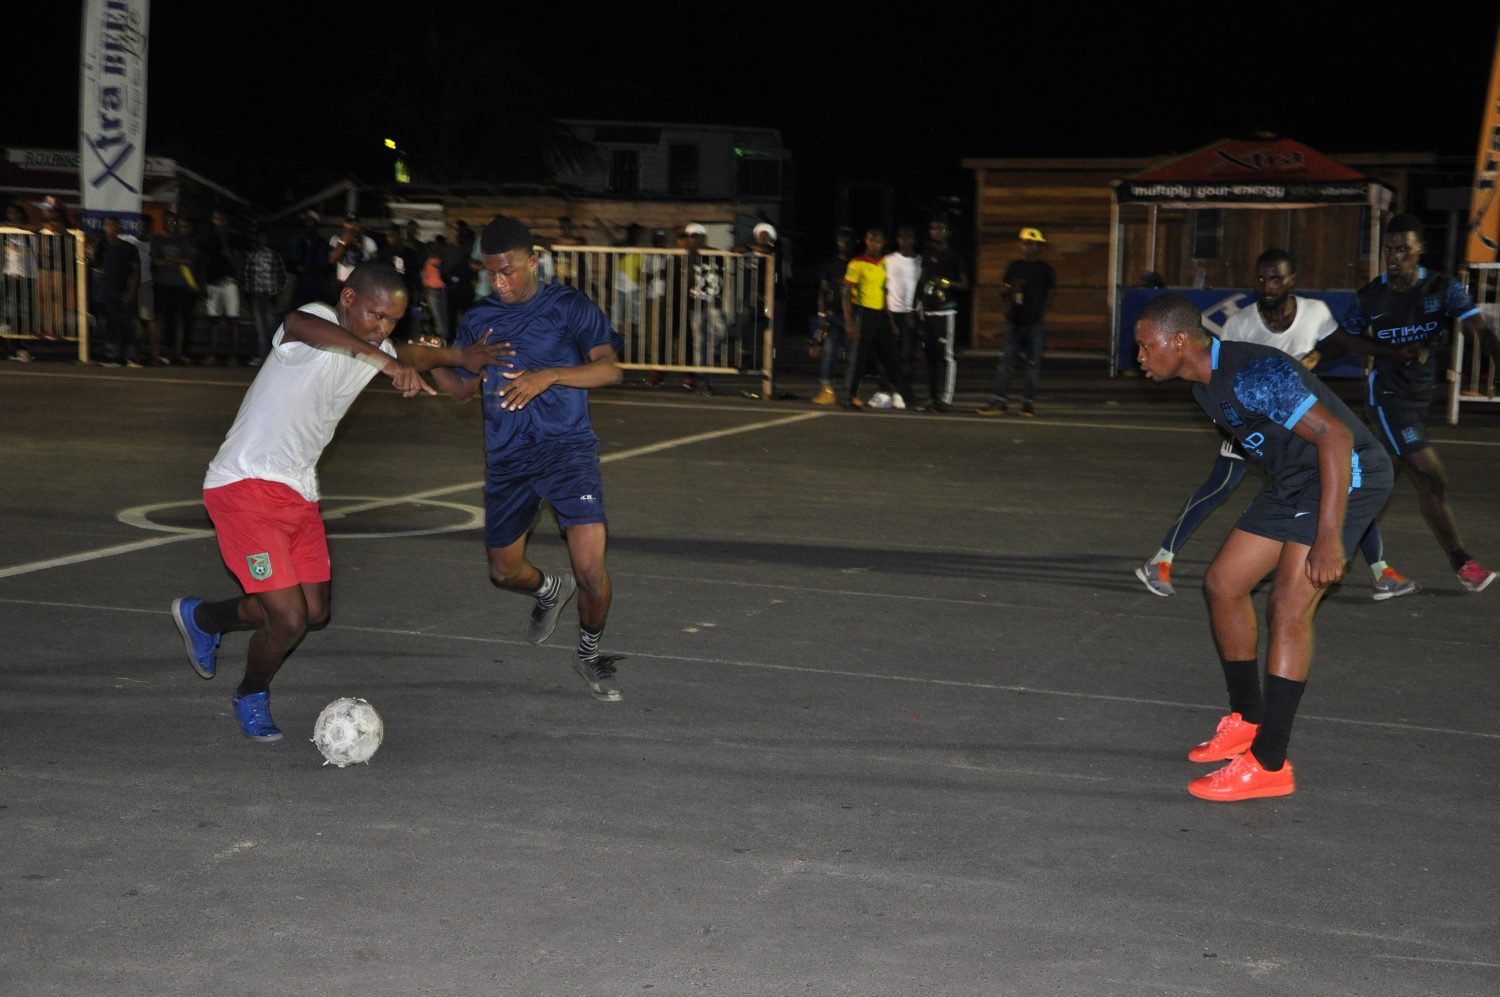 Jermaine Junior (left) of Tucville attempting to dribble a Silver Bullets player during the opening fixture of the group stage in the 3rd Annual Xtra Beer ‘Ballers in the Summer’ Street Football Championship at the Pouderoyen Tarmac